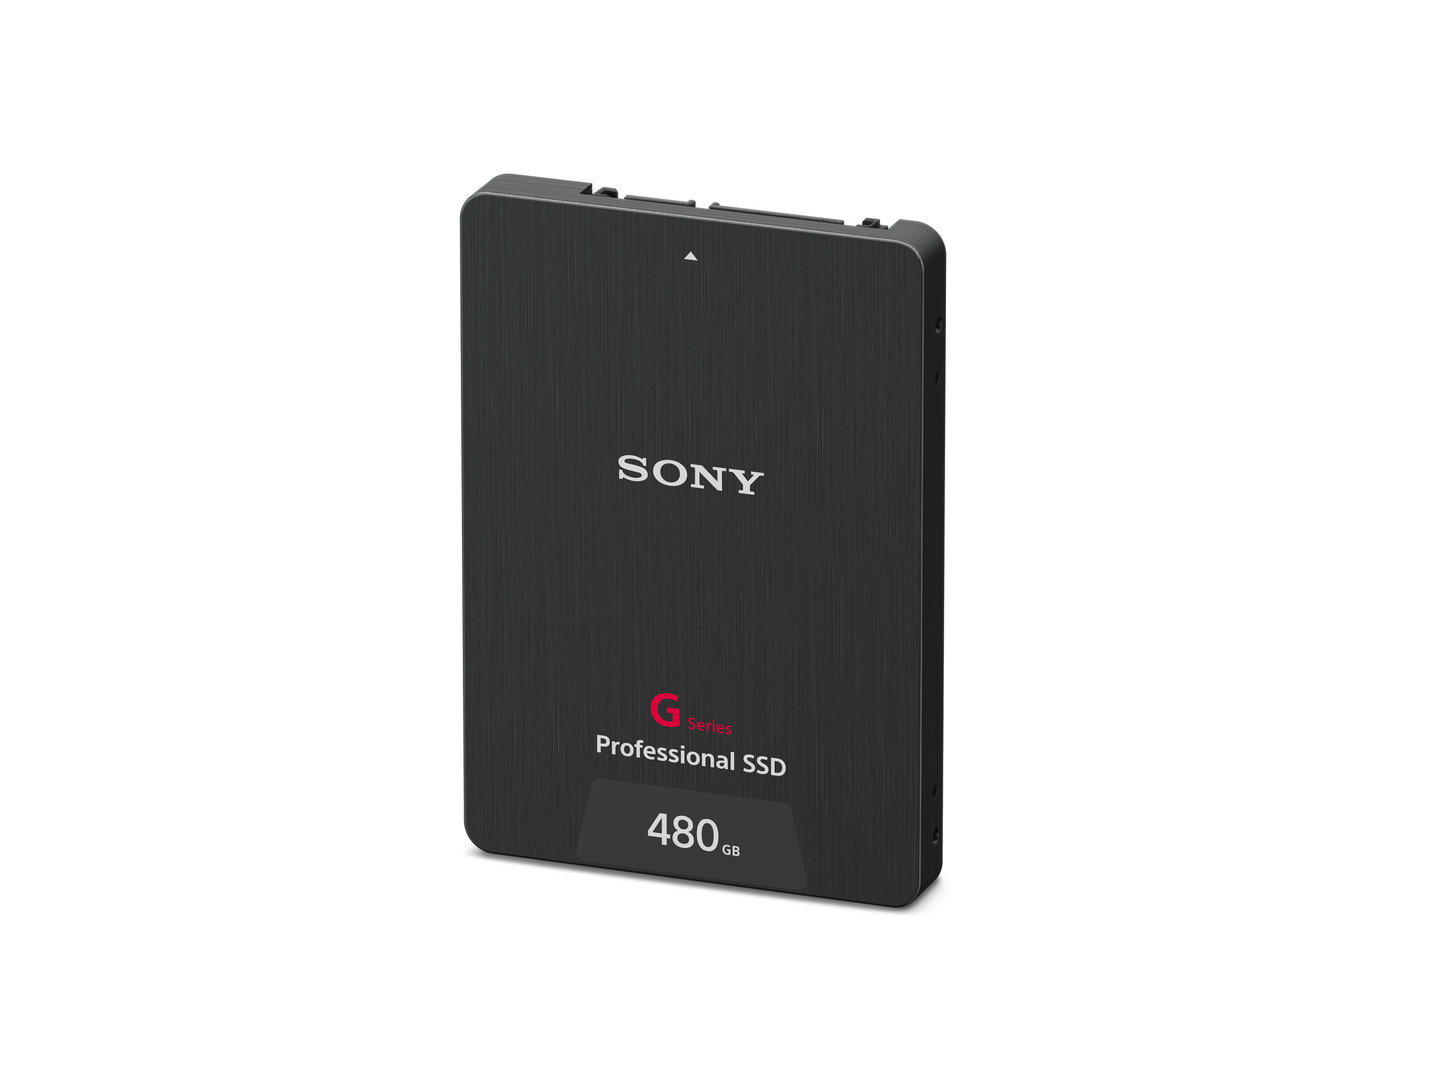 Sony G Series Professional SSD